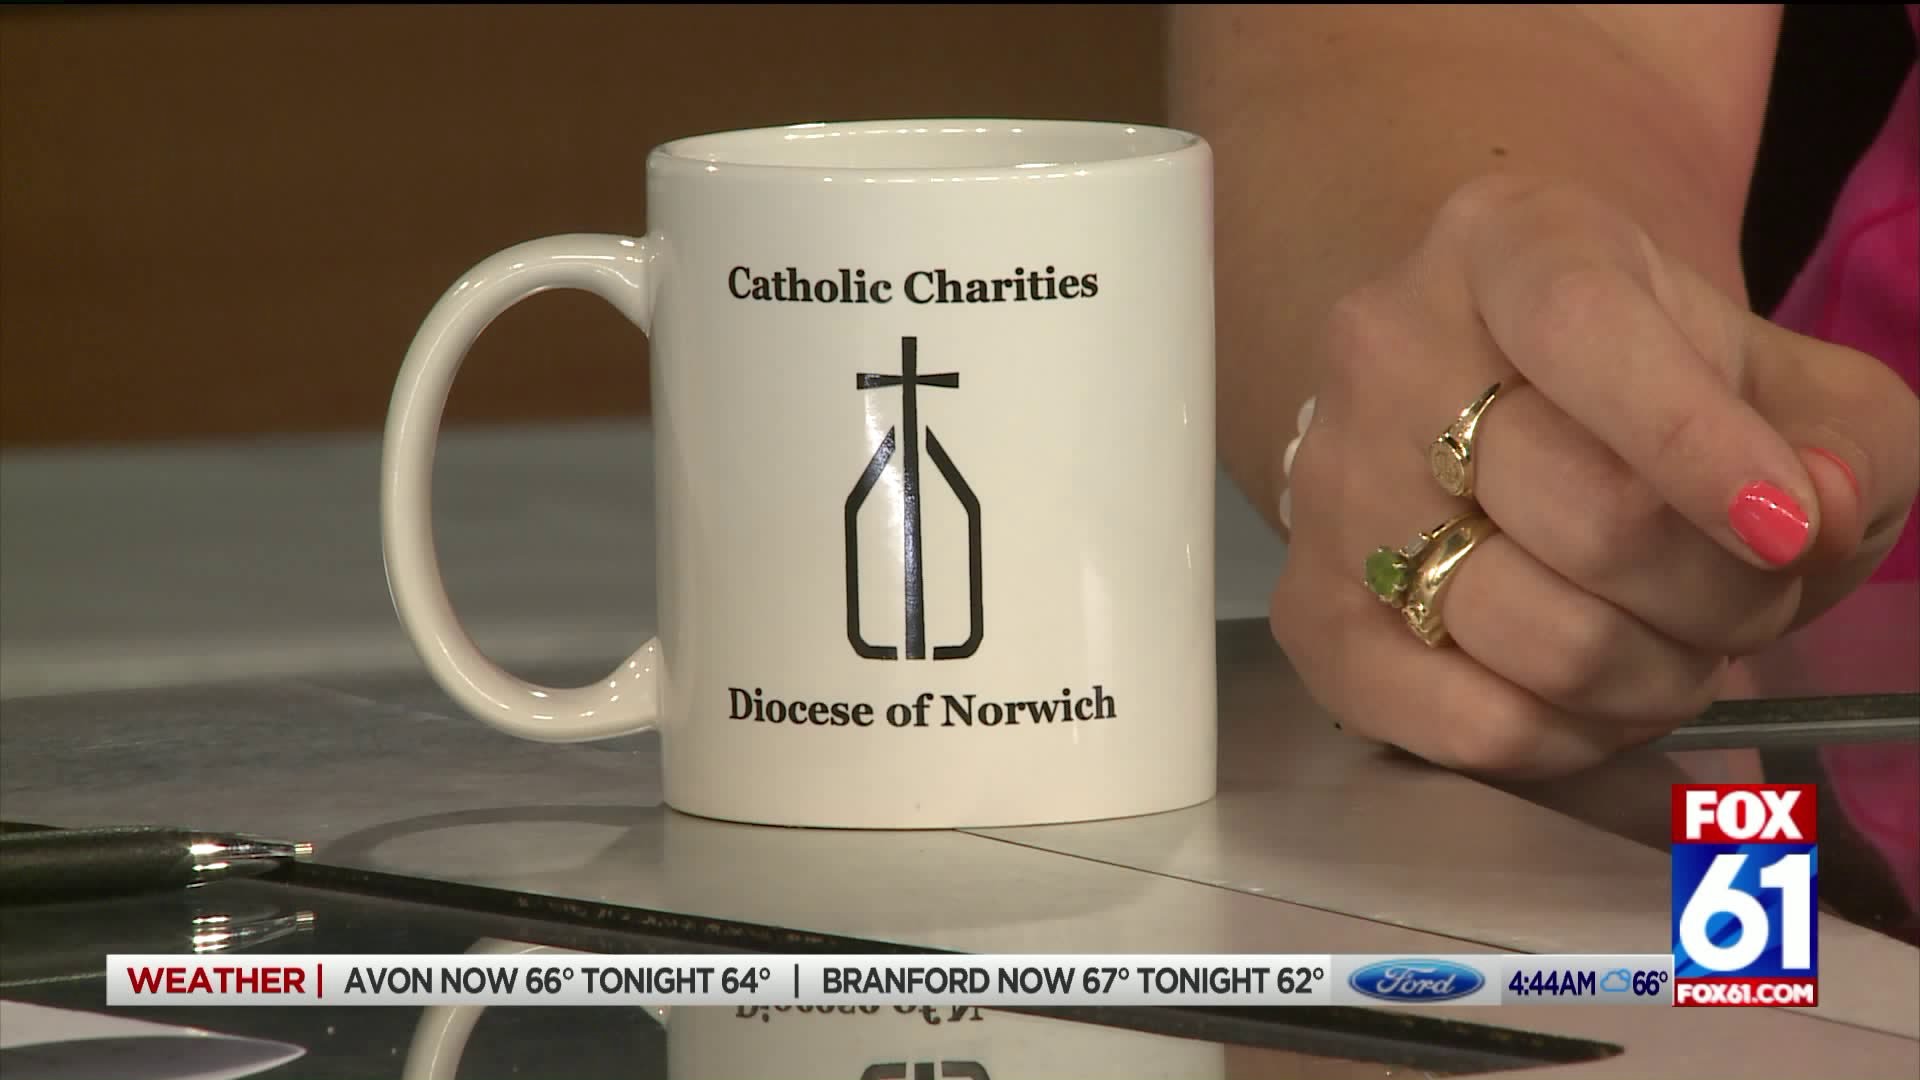 Catholic Charities Diocese of Norwich